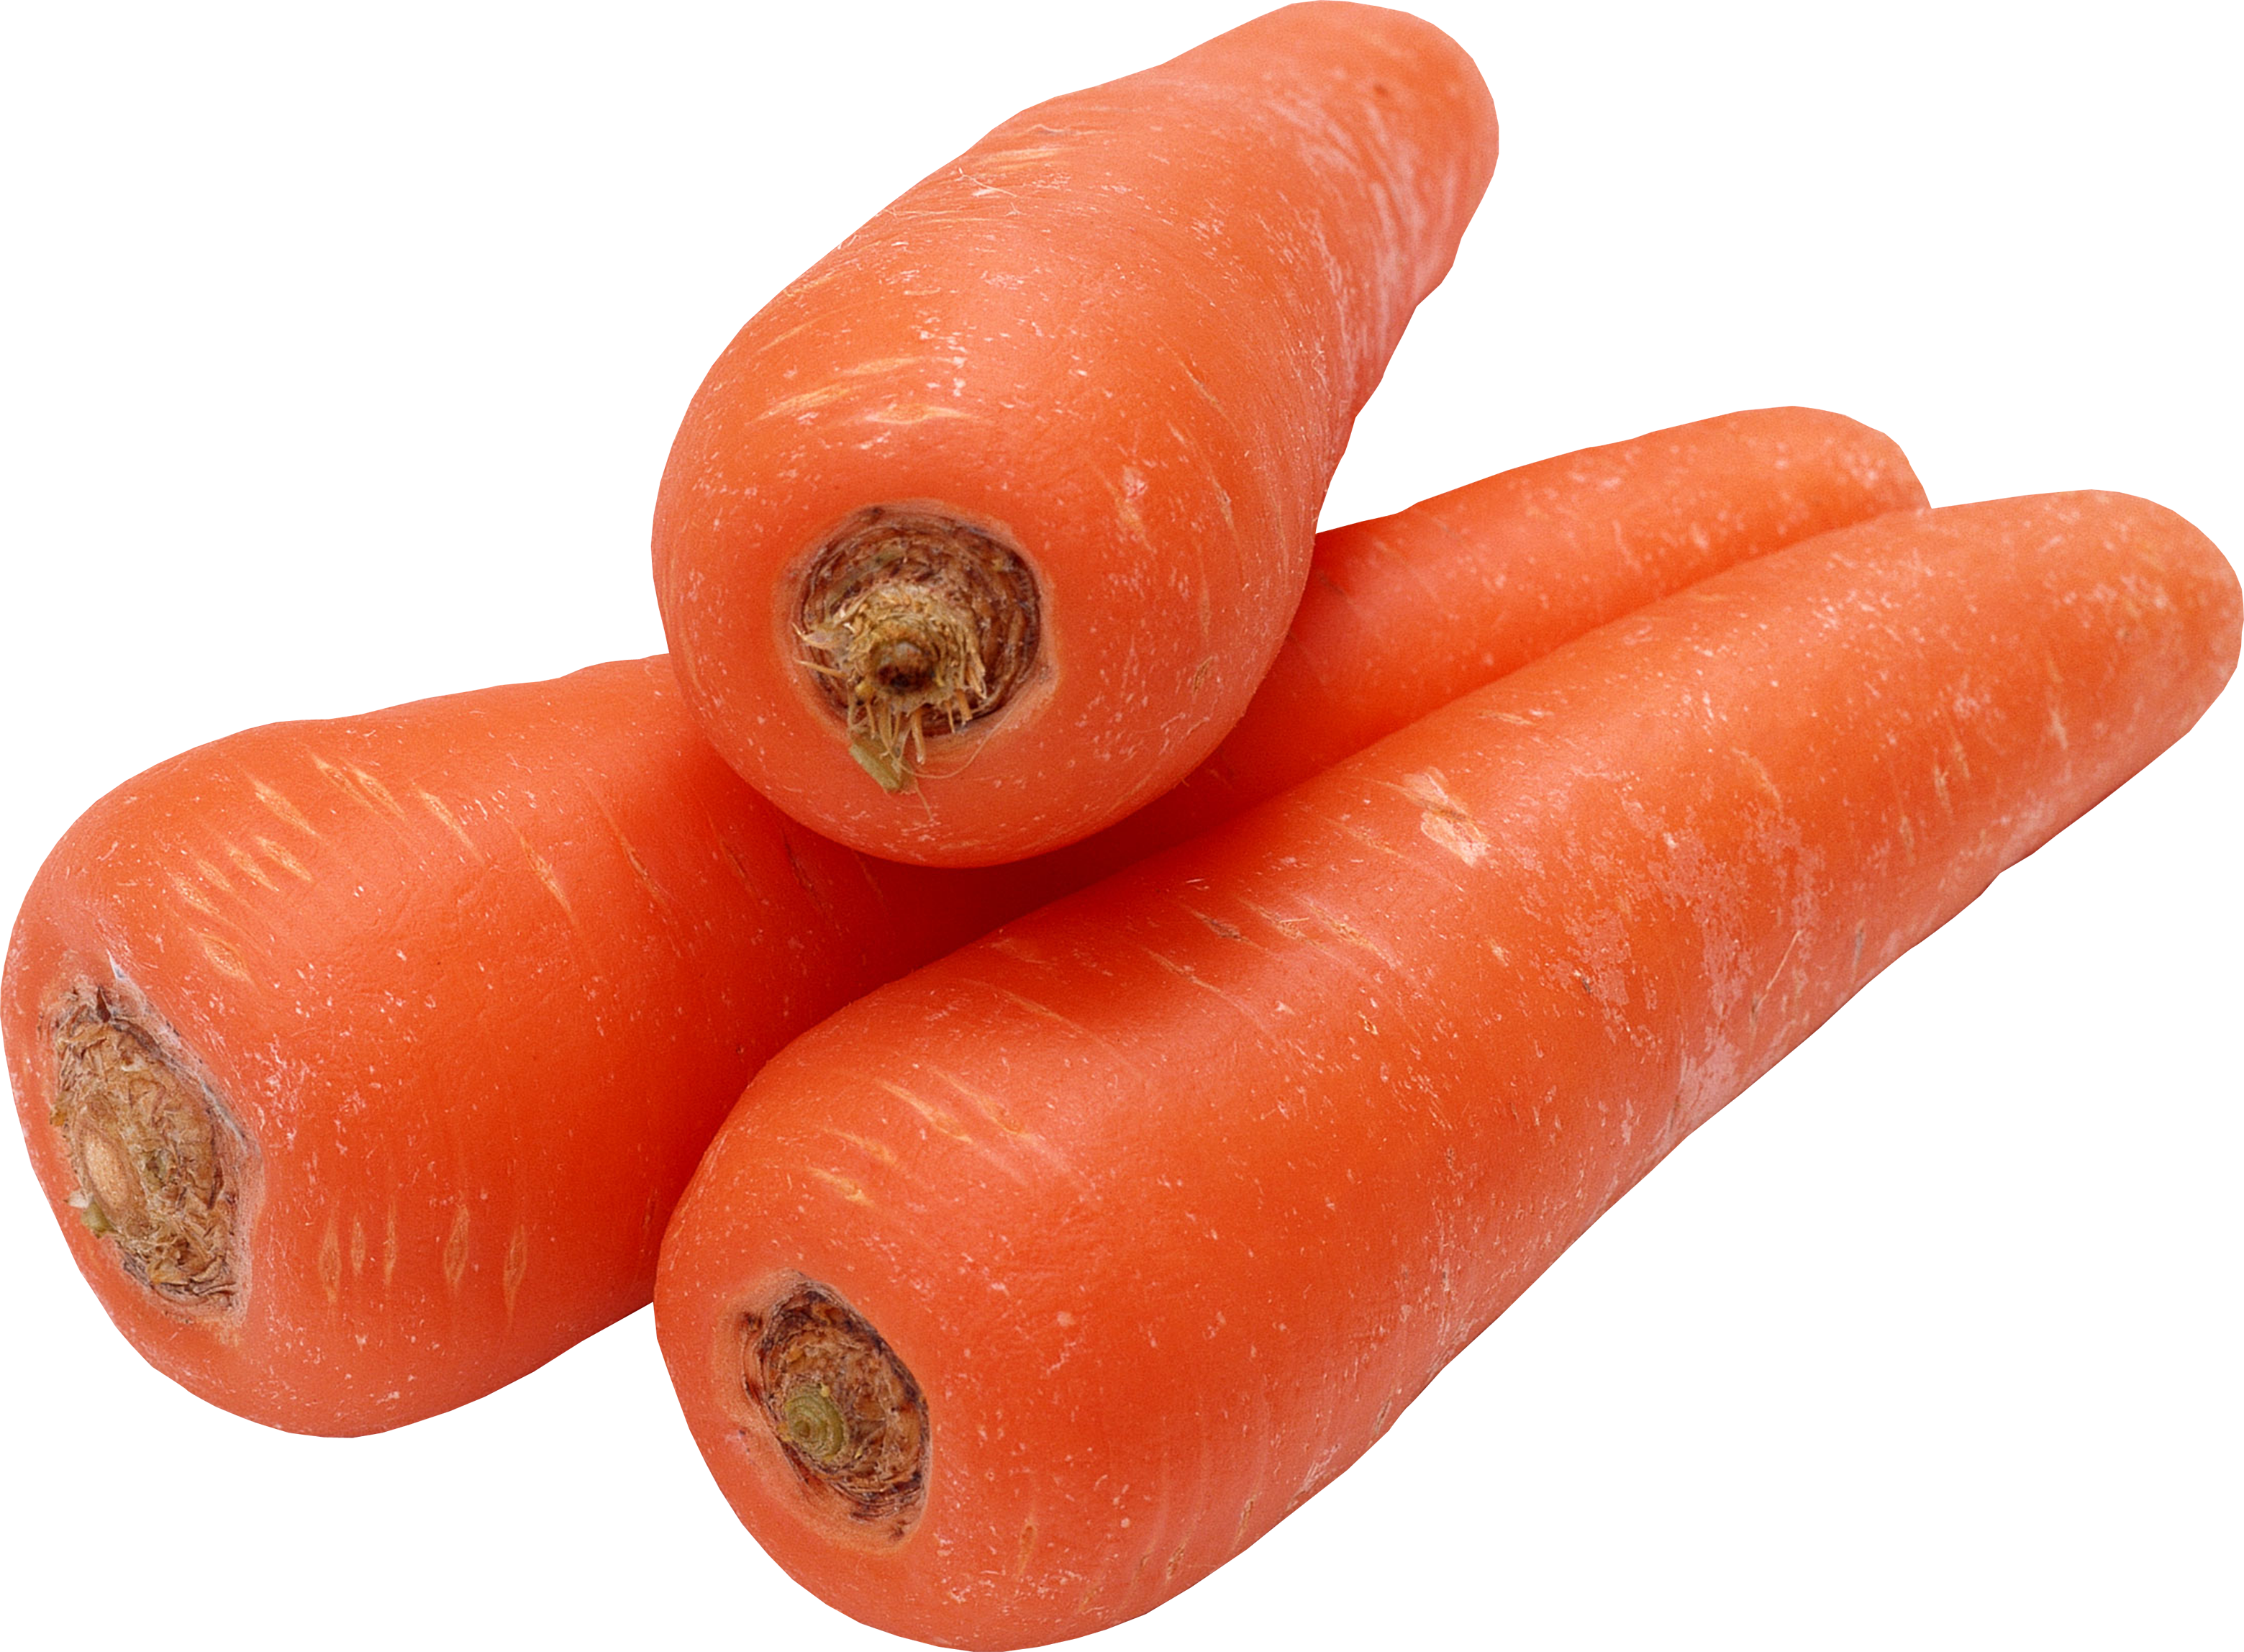 Carrot PNG - 19918